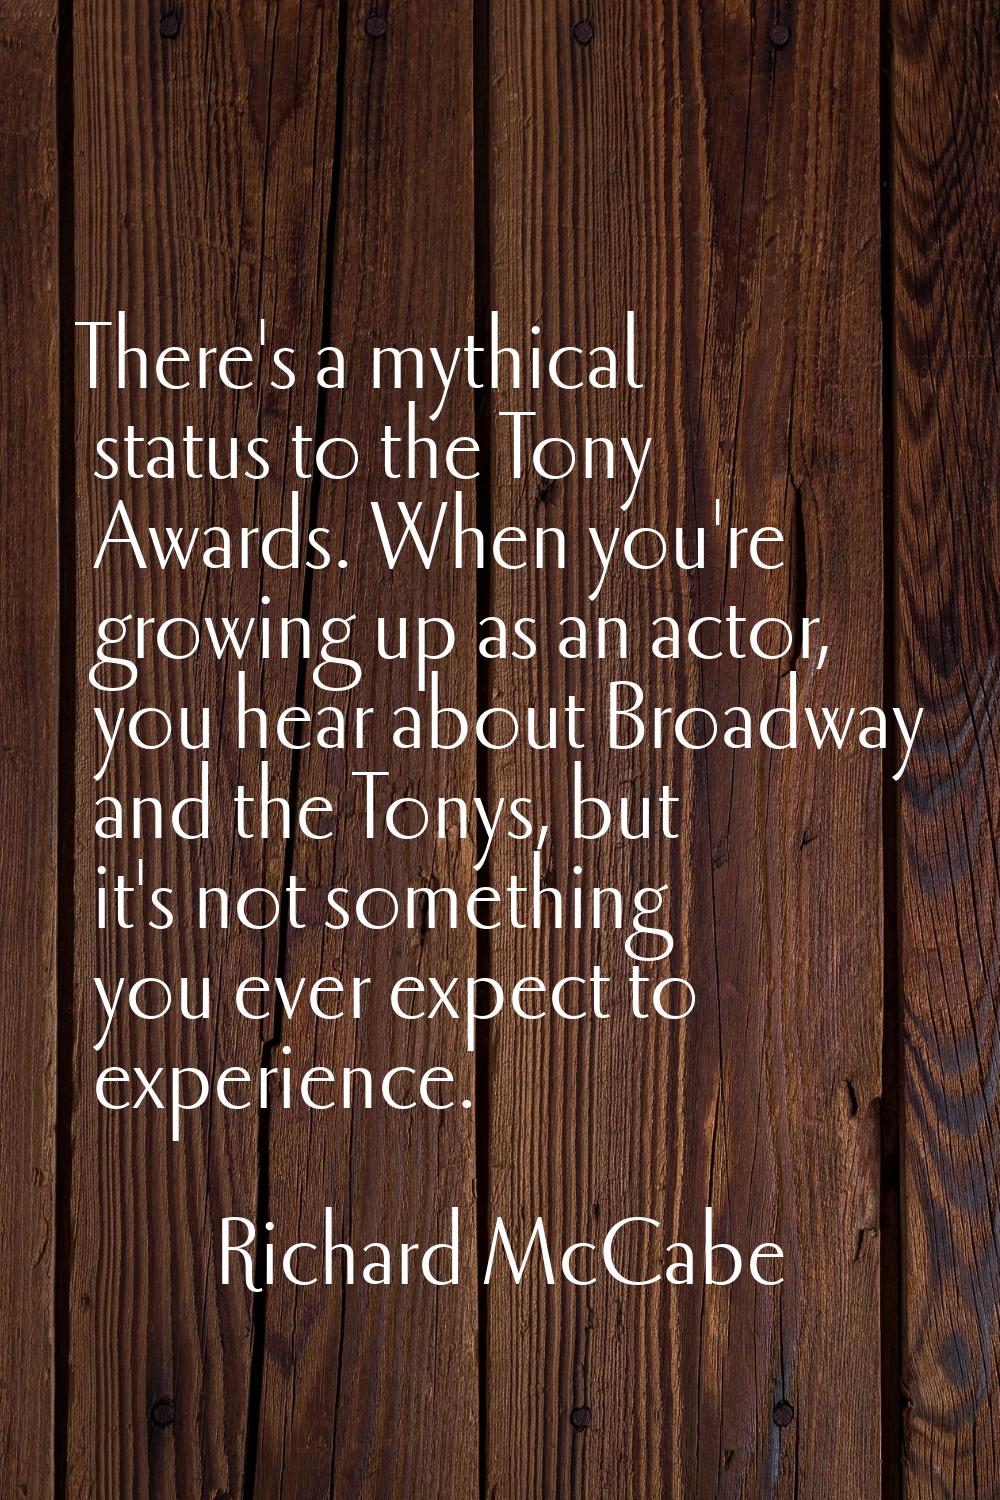 There's a mythical status to the Tony Awards. When you're growing up as an actor, you hear about Br